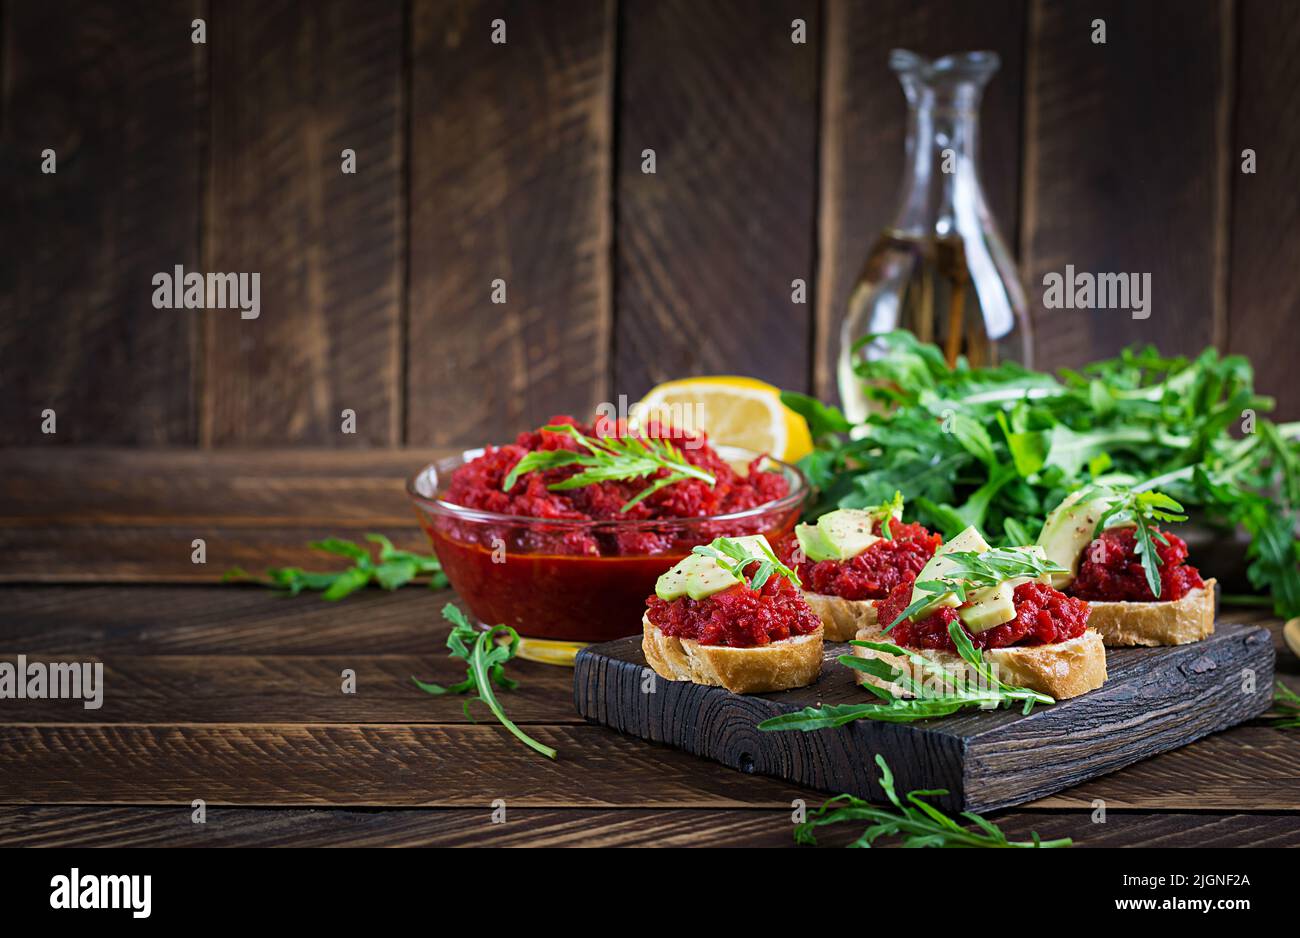 Vegetarian food. Healthy eating. Sandwiches with beetroot  pate. Stock Photo